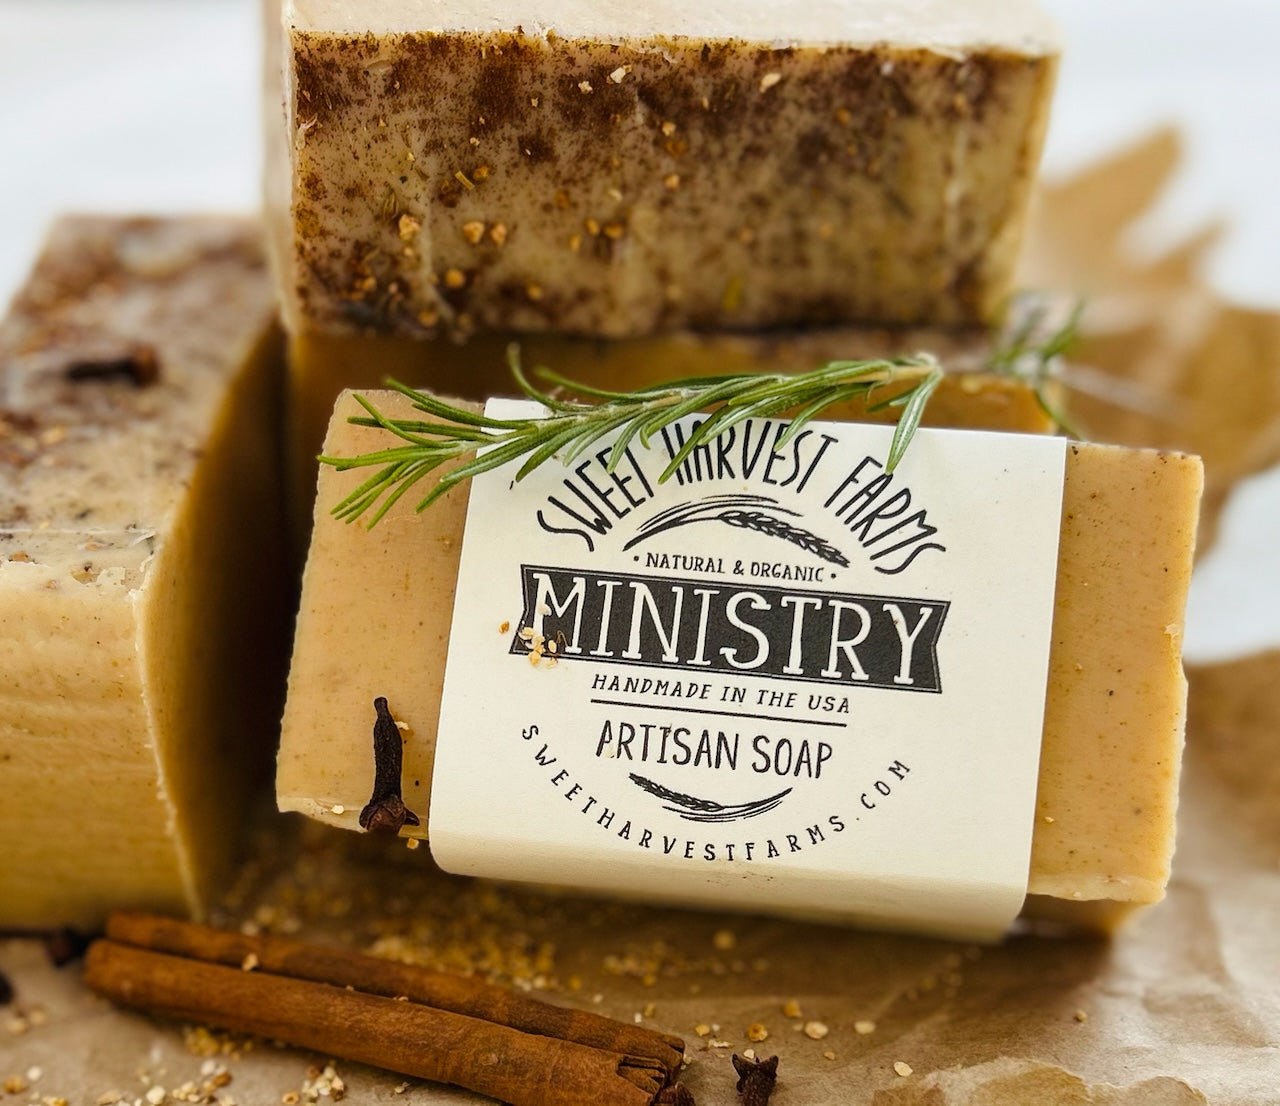 Our Ministry Oil is our reformulation of Thieves Oil. Sweet Harvest Farms Thieves oil is uncut and has an amazing aroma! Better than Thieves oil our formulation using organic oil can stop the norovirus in its tracts! Sweet Harvest Farms organic handmade soap containing Ministry Oil/Thieves Oil makes his soap an amazing alternative!